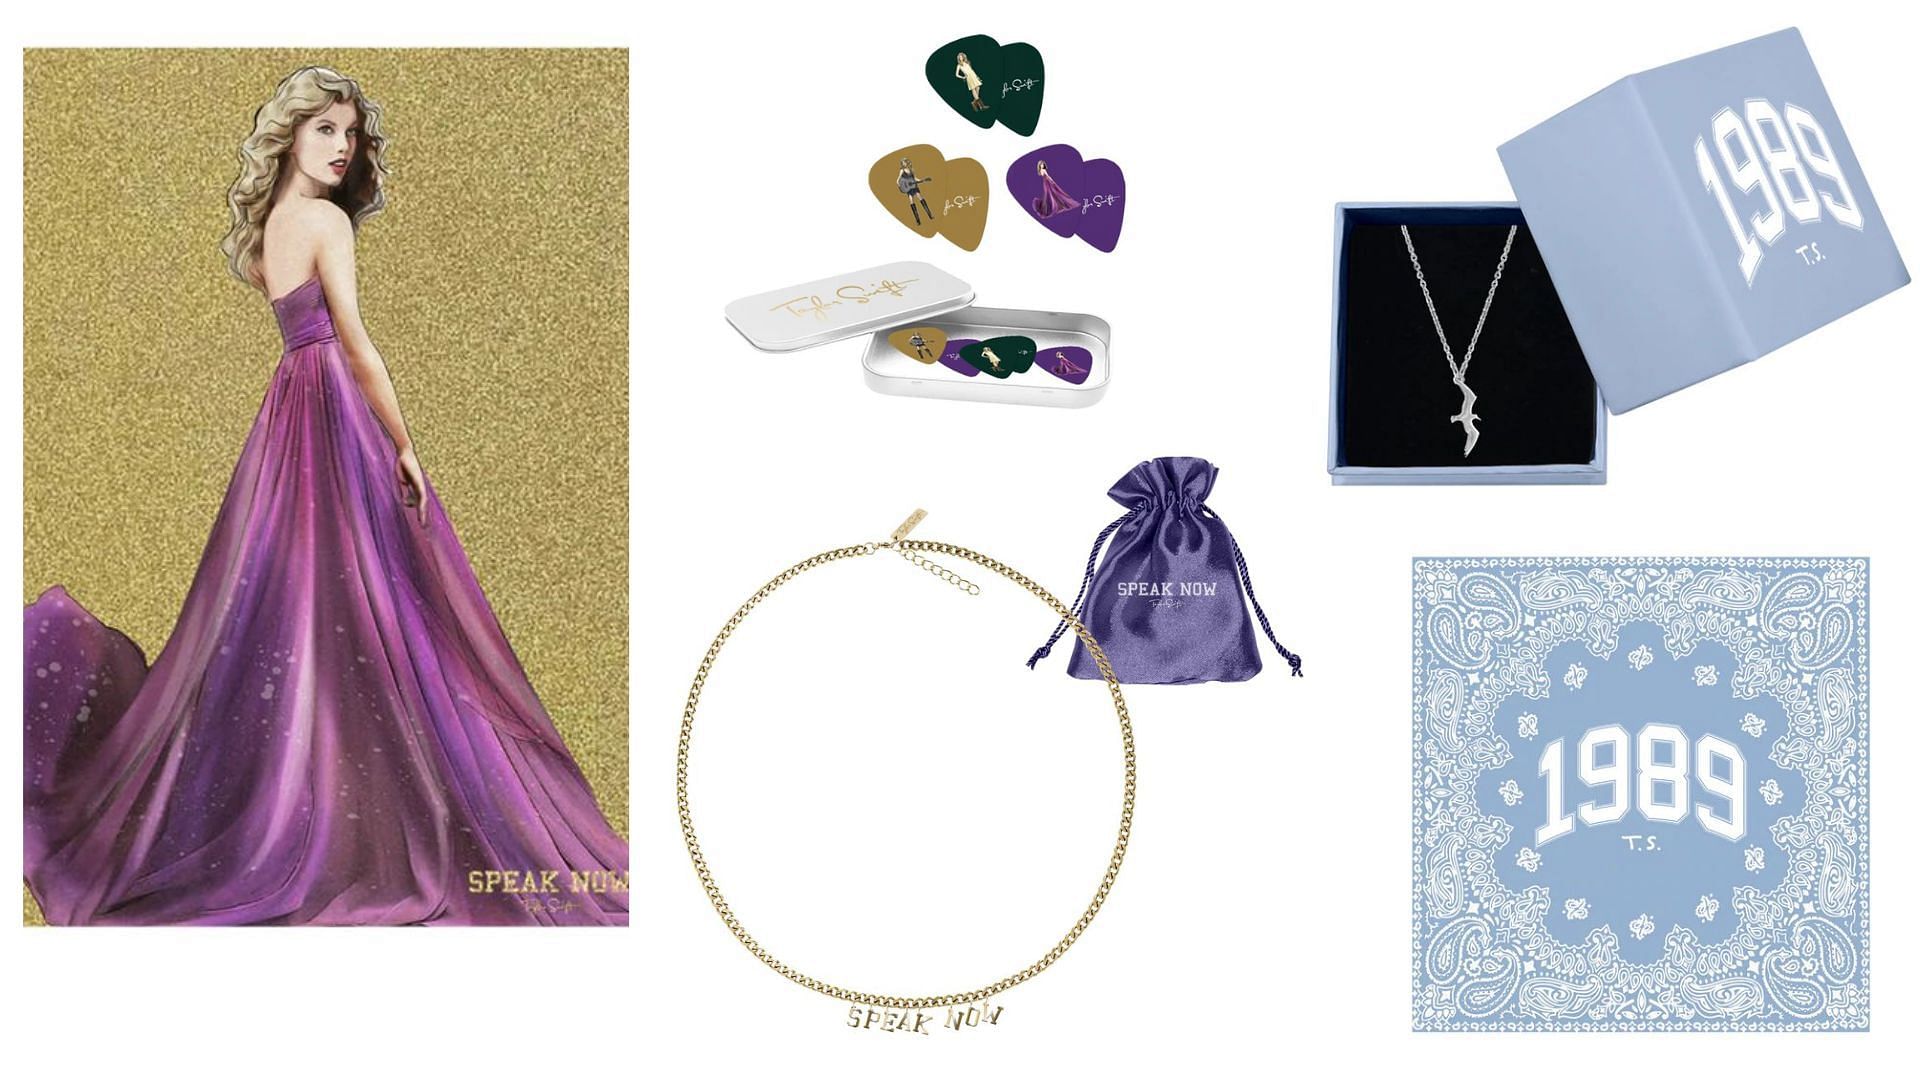 Taylor Swift collection pieces (Image via Taylor Swift stores)